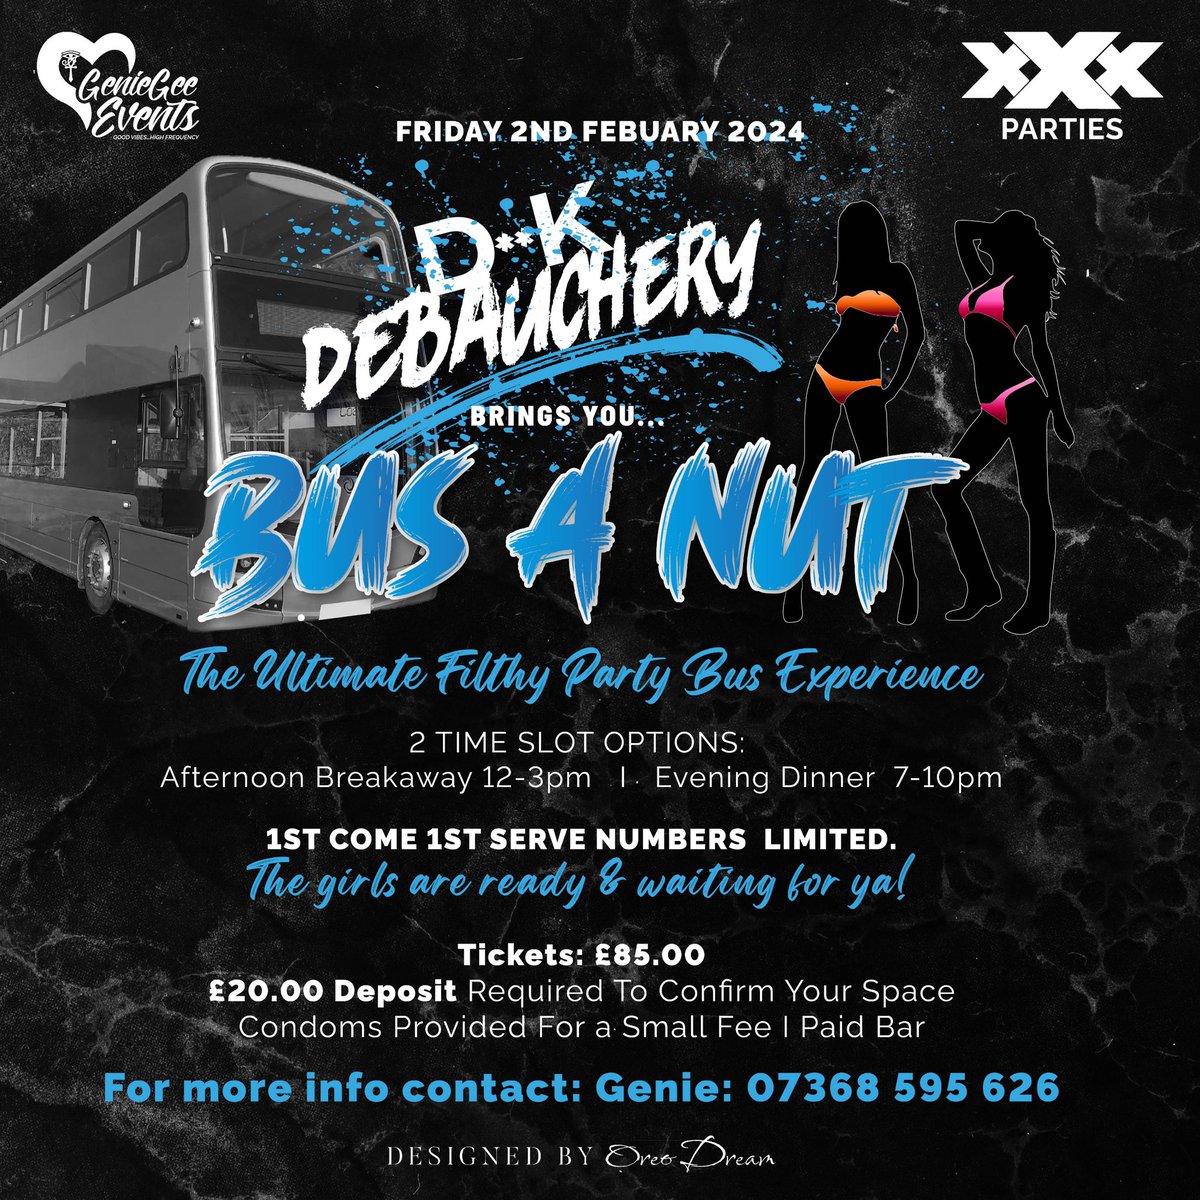 Friday 2nd February Dick Debauchery invites you to… ‘Bus-A-Nut’ The Ultimate Filthy PartyBus Experience!!! 🤭😜🍆💦💦💦 Get Ya Buss Passes Here 👇🏾👇🏾👇🏾 buytickets.at/dkdebauhery/11…